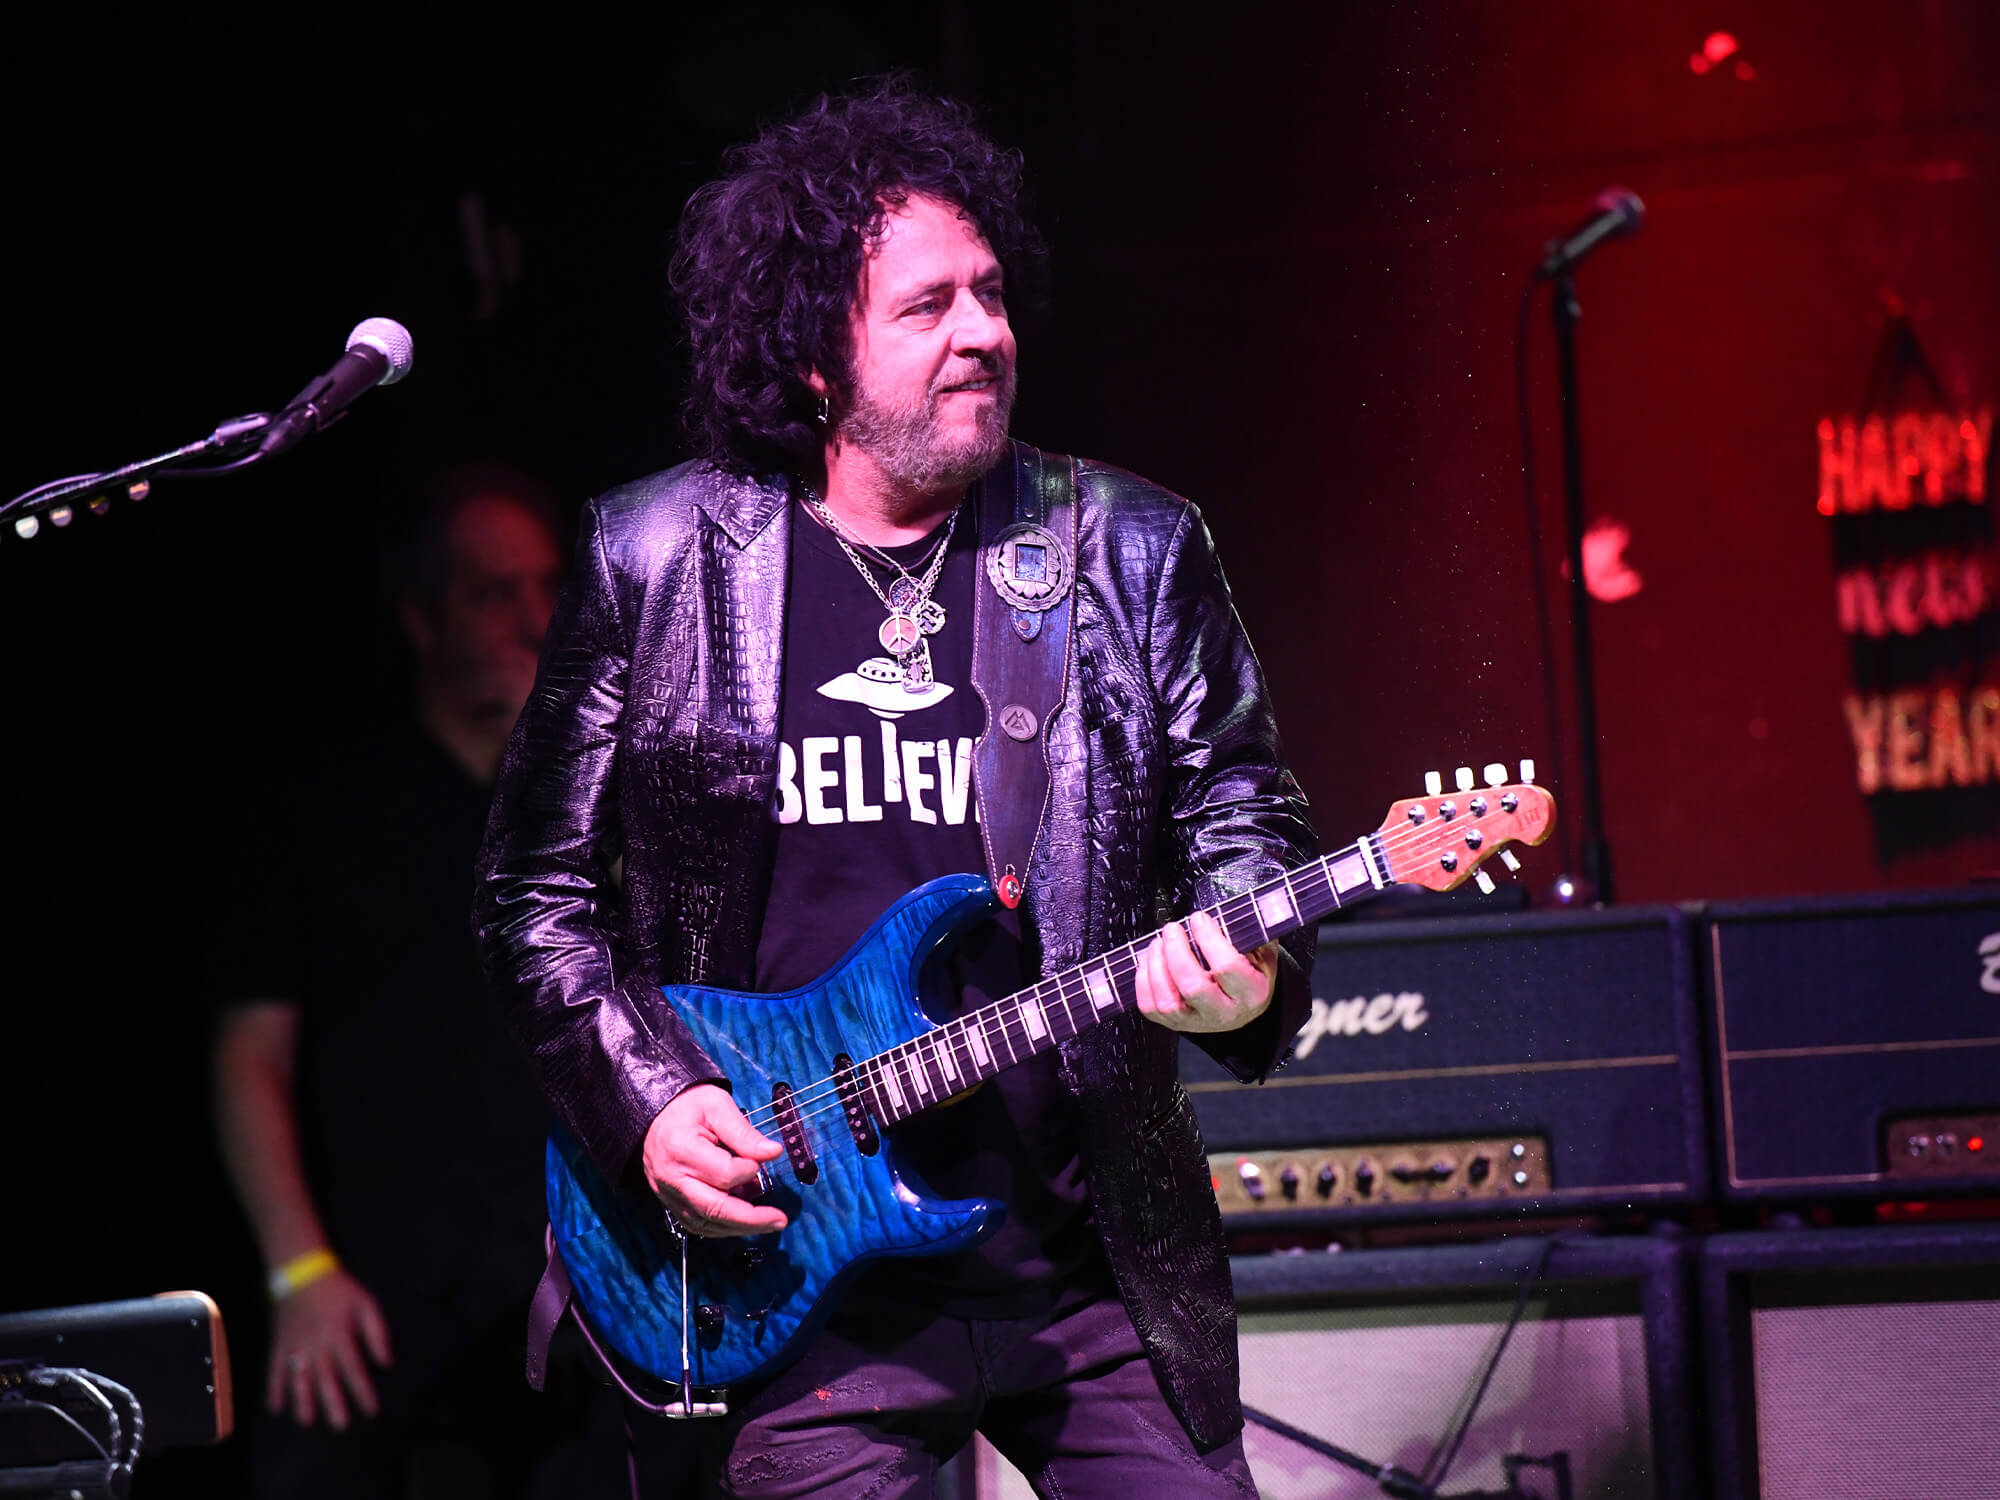 Steve Lukather on stage playing a blue Ernie Ball guitar. He is smiling and looking to his left.